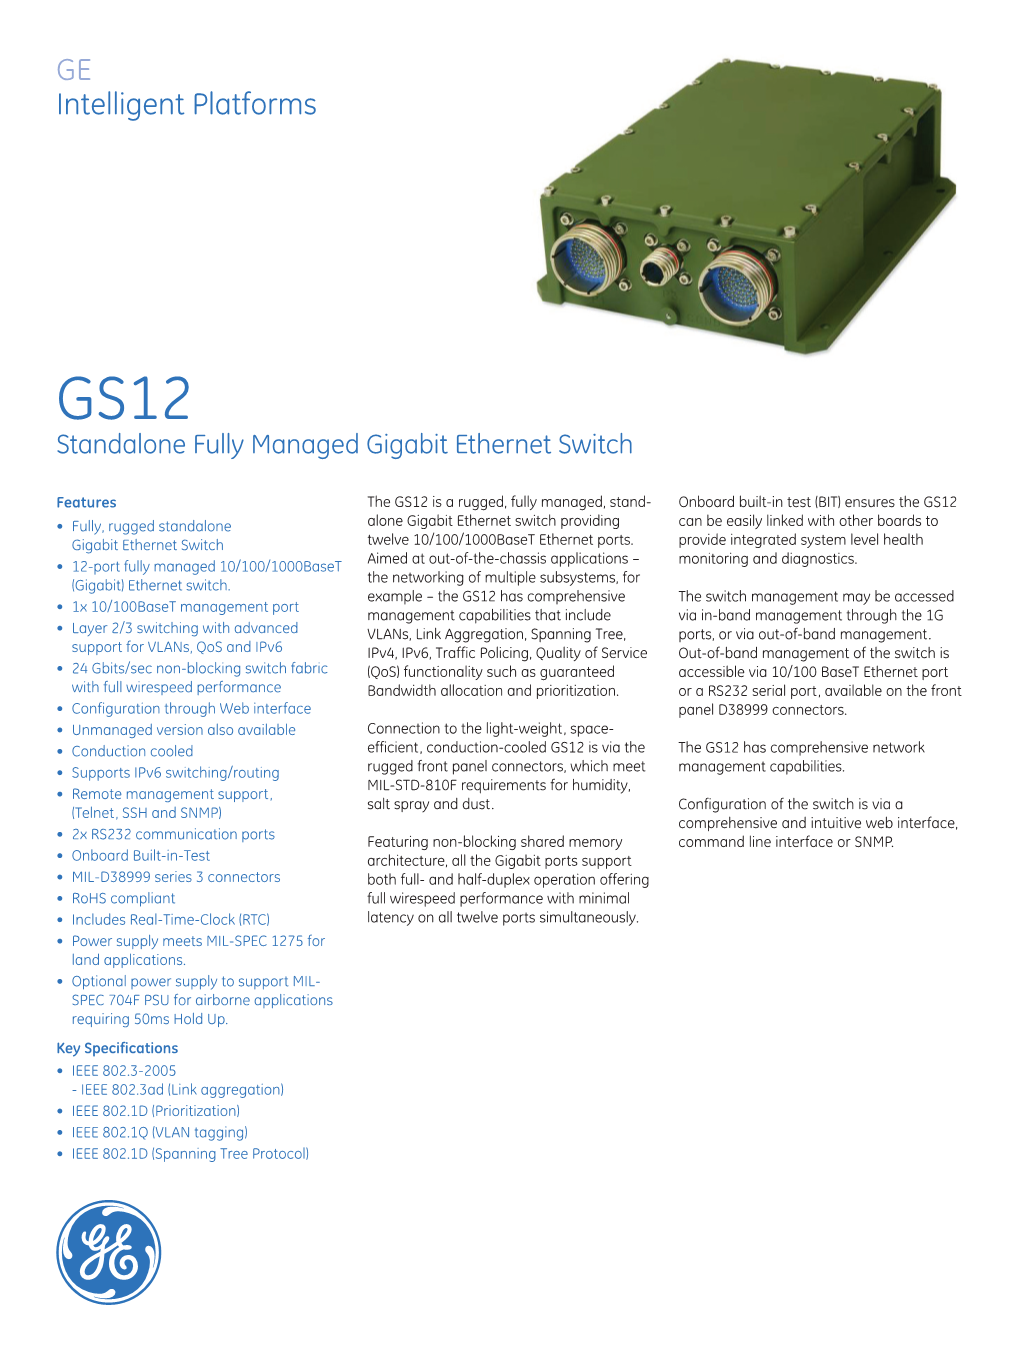 GS12 Standalone Fully Managed Gigabit Ethernet Switch